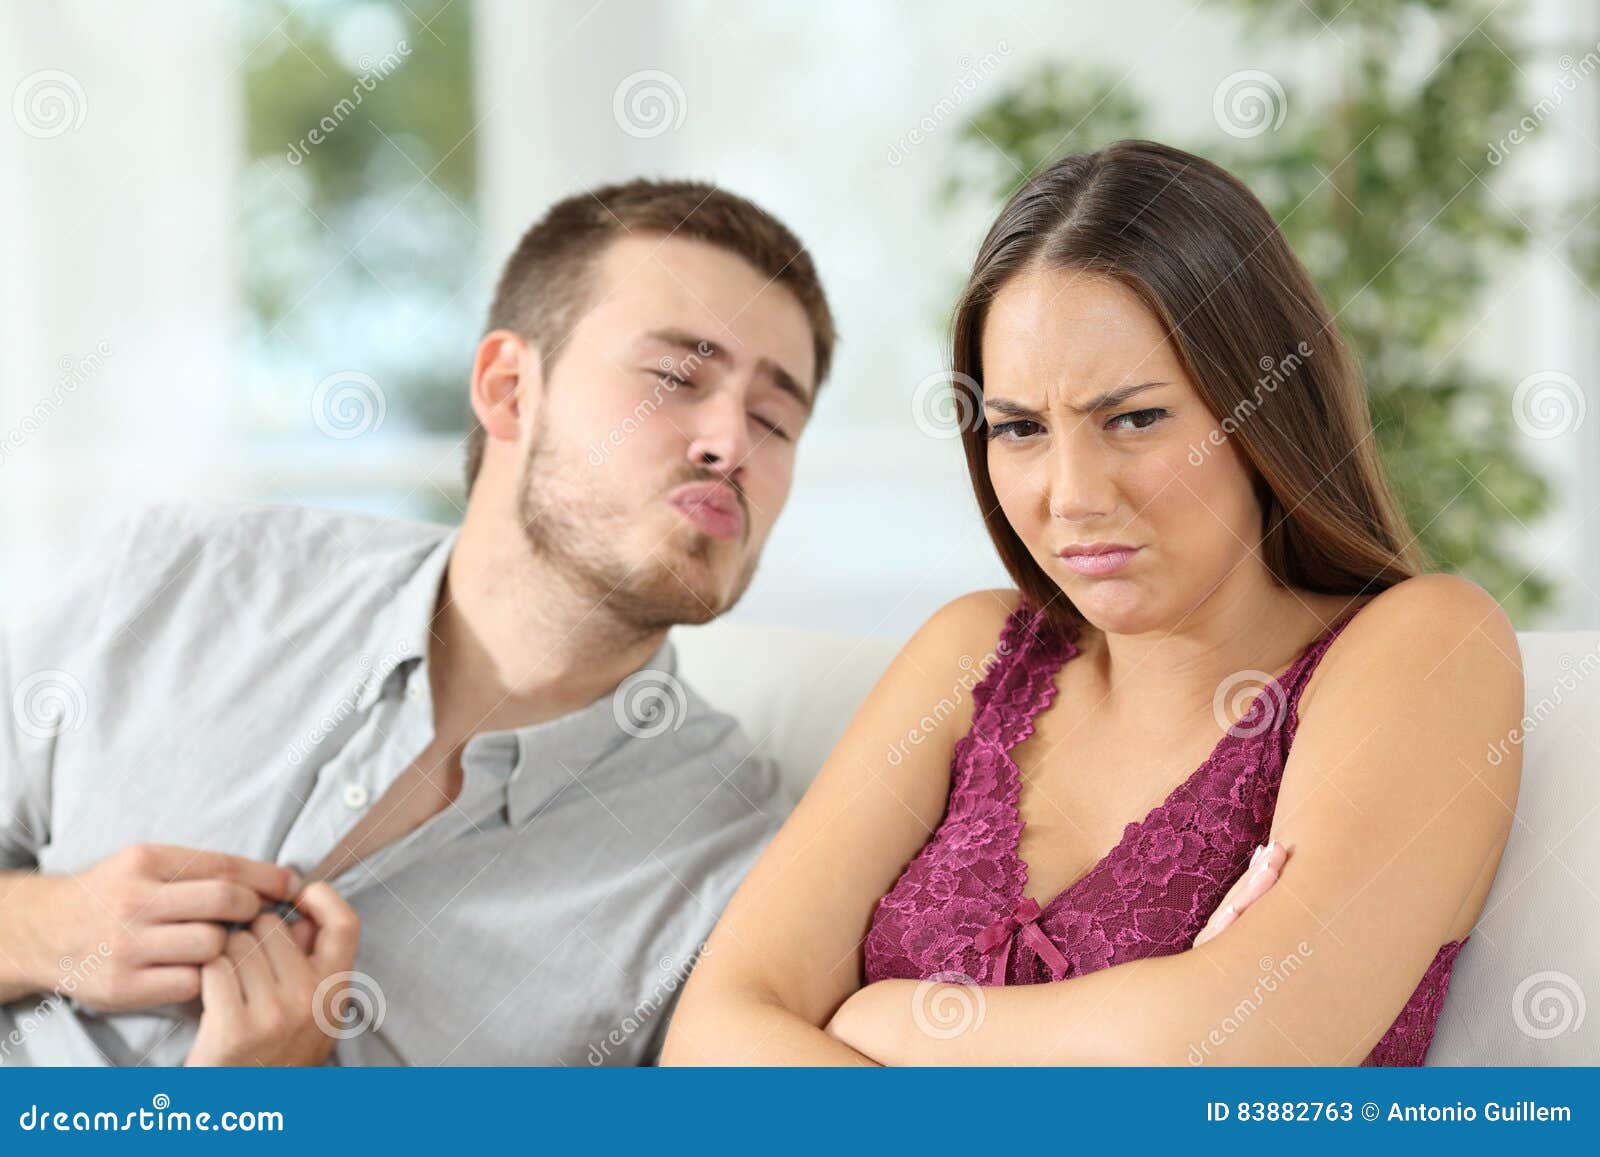 Angry Woman Rejecting a Sex Offer from Her Boyfriend Stock Image picture